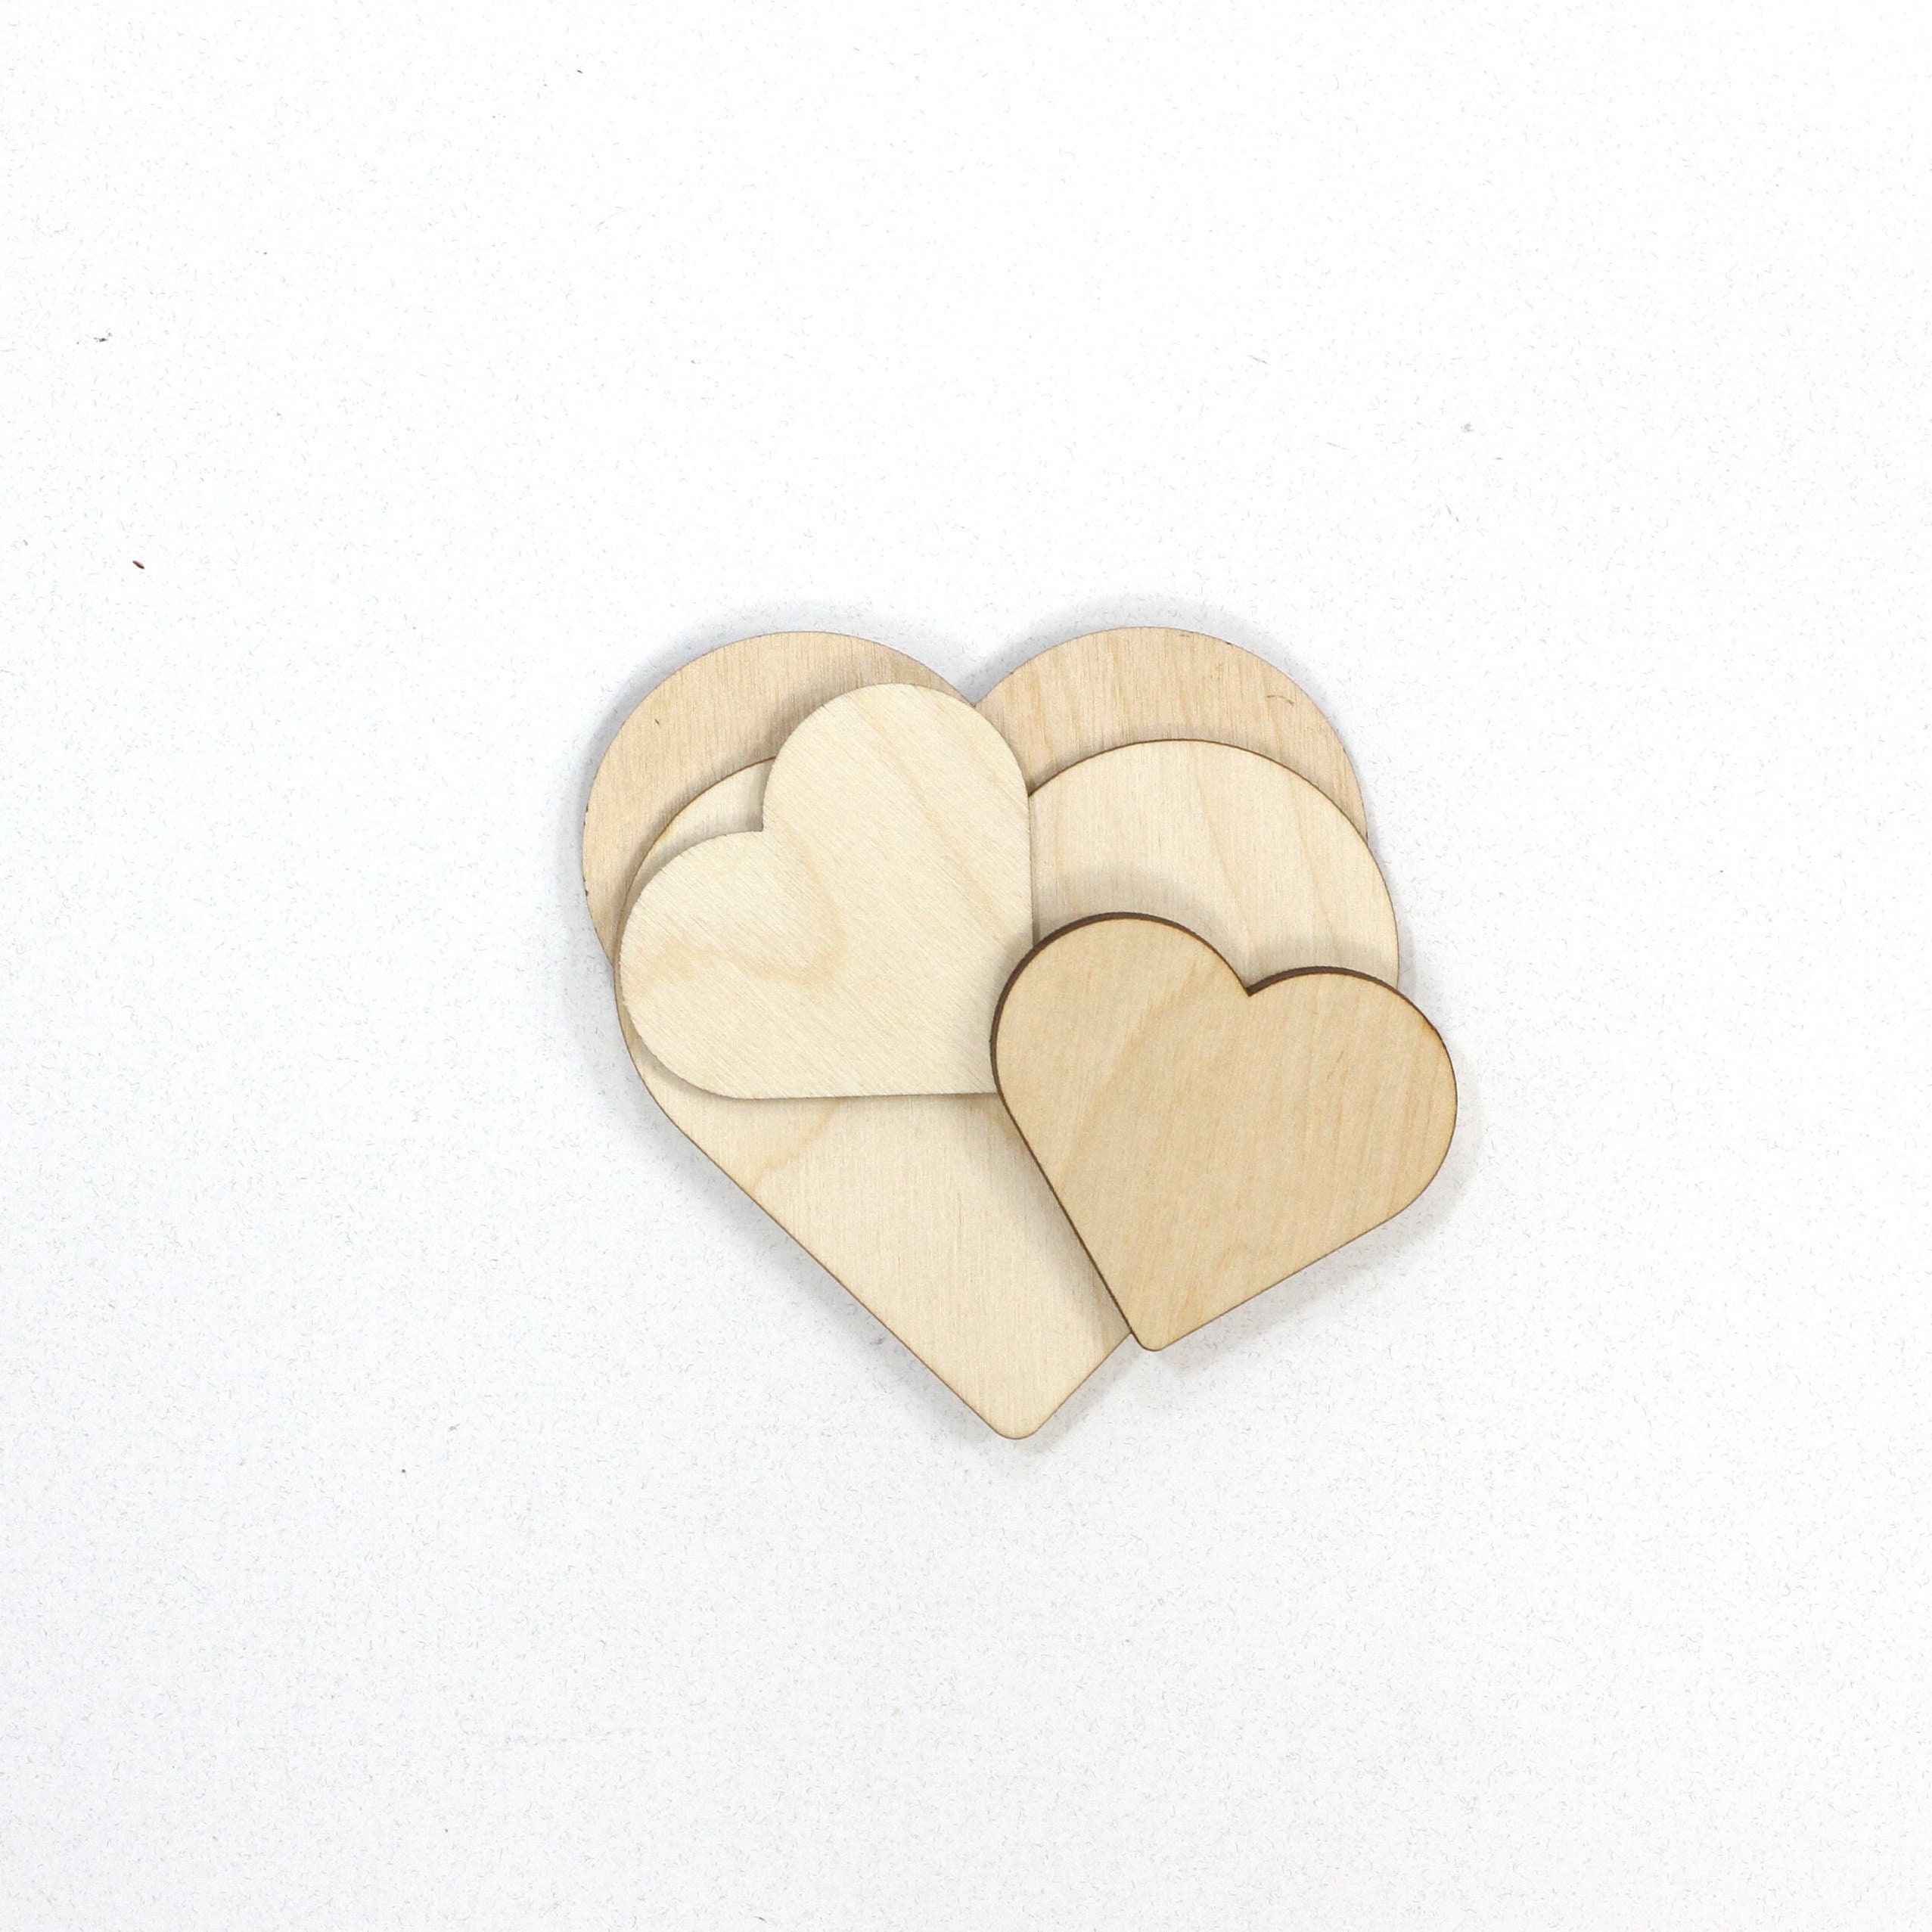 Wooden Heart Shaped Buttons for Crafts - Laser Cut - Wooden Buttons,  Knitting Buttons, Sewing Buttons, Craft Buttons